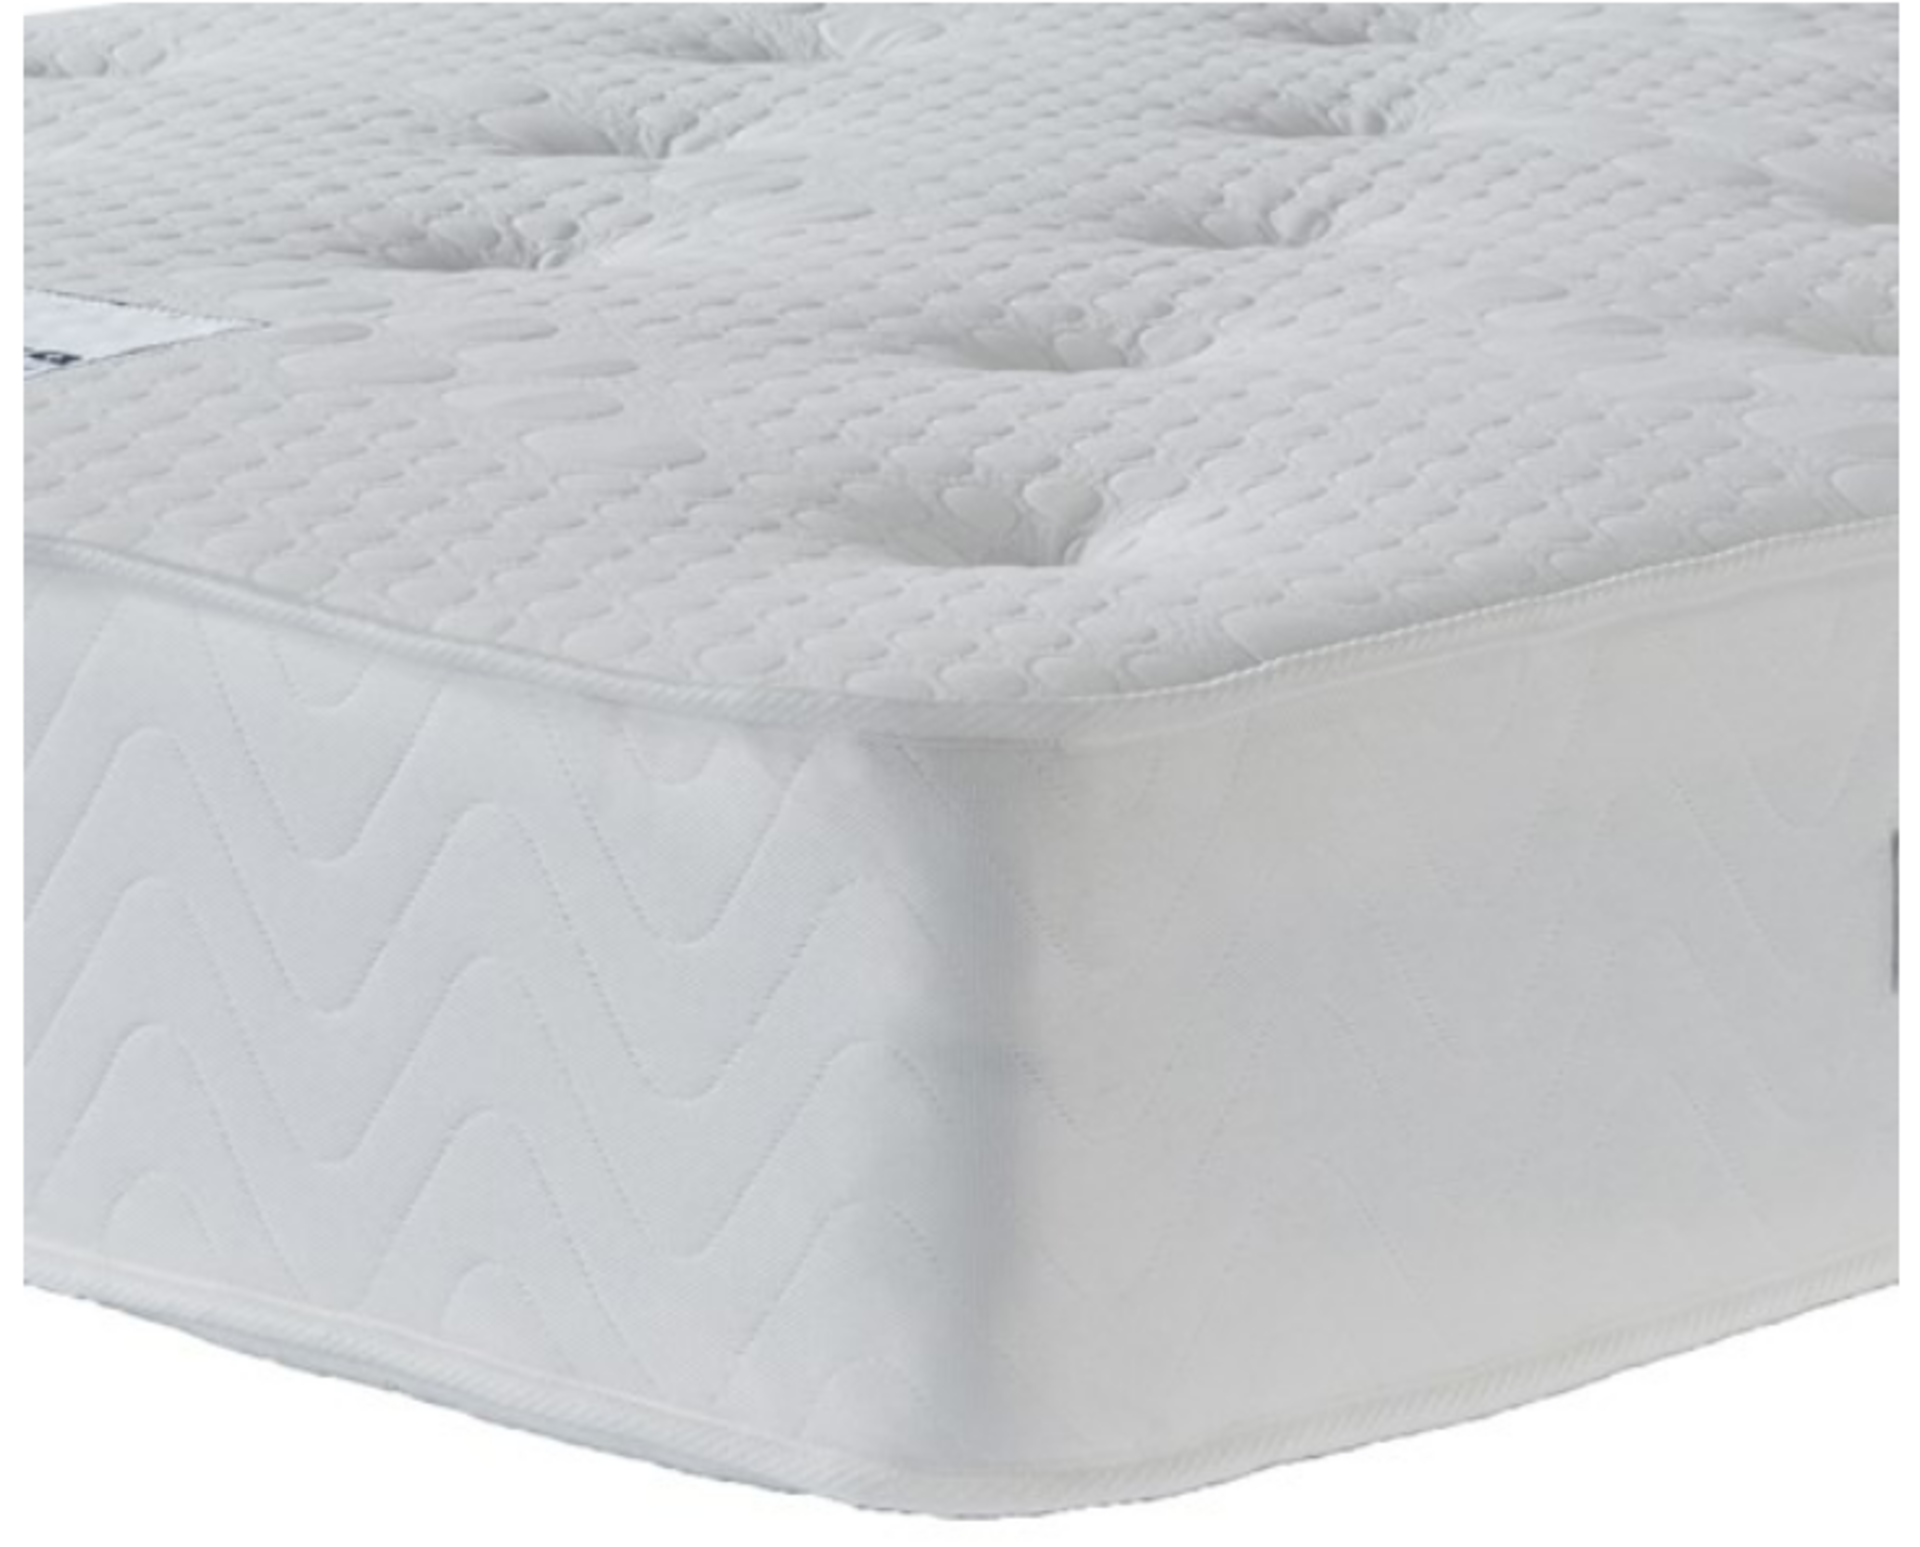 Carpetright SLEEPRIGHT MODENA Bed Mattress 4ft6 Double RRP ¶œ399.00 - This product has been graded